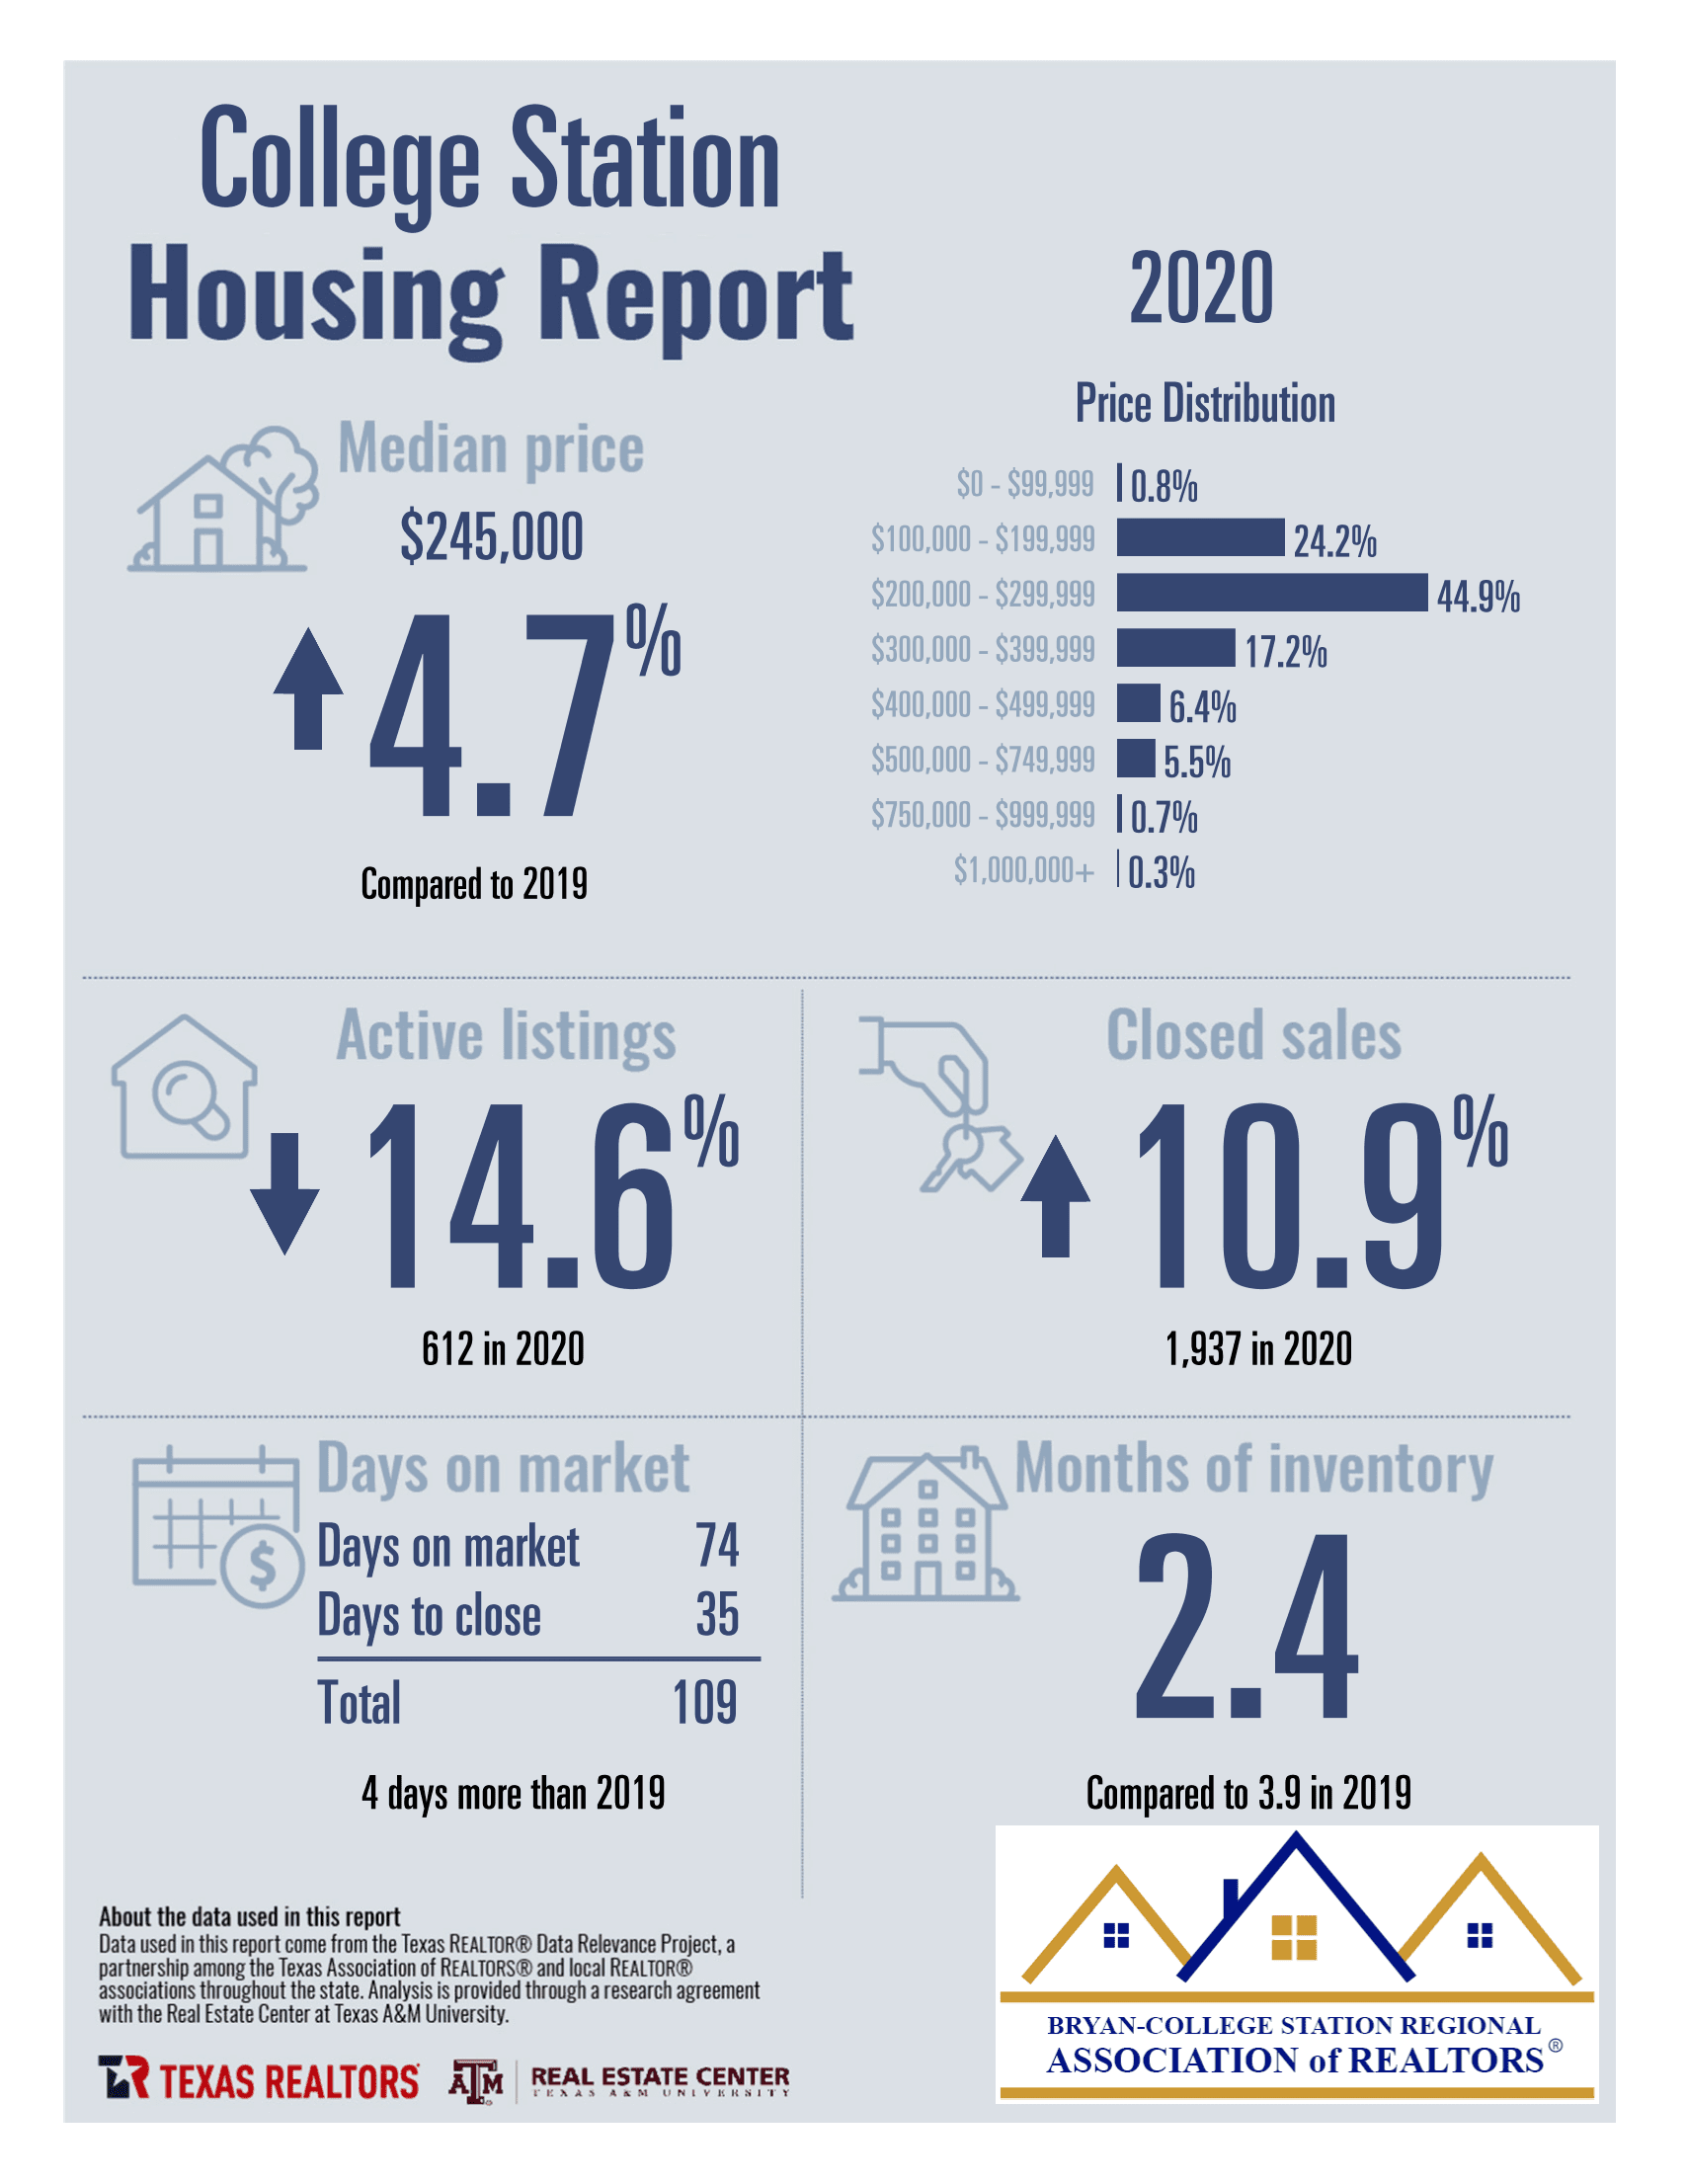 college station 2020 housing report - judy sweat